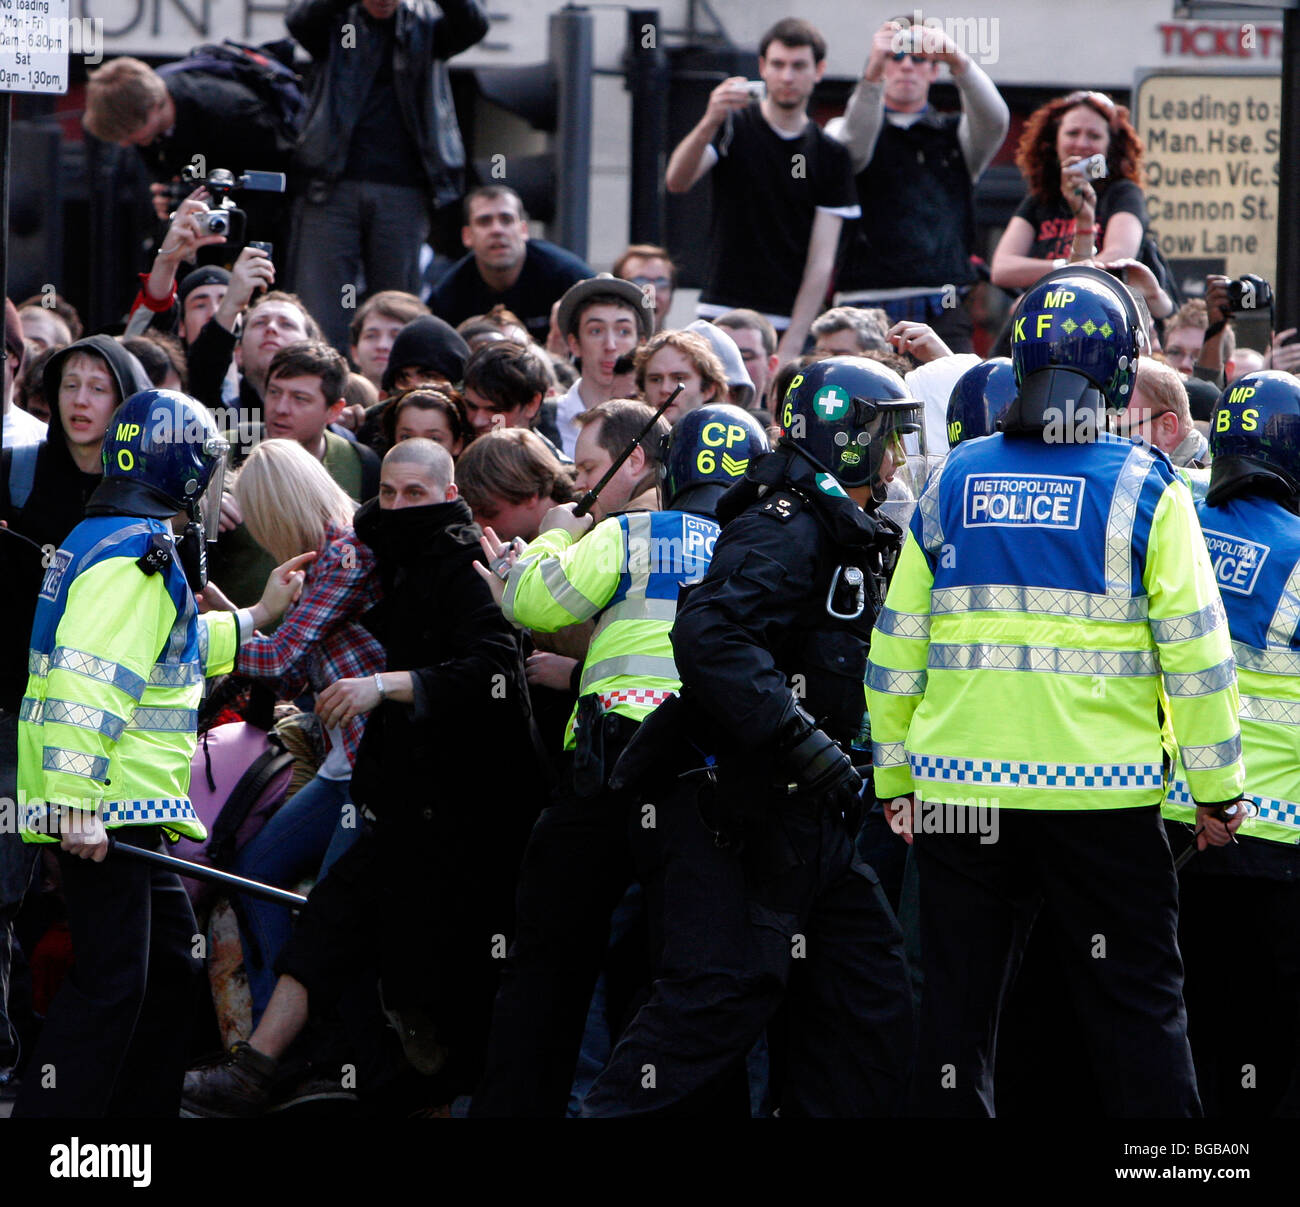 England, London, City, Threadneedle Street, Bank of England G20 Protests, April 2009. Police confront protesters. Stock Photo